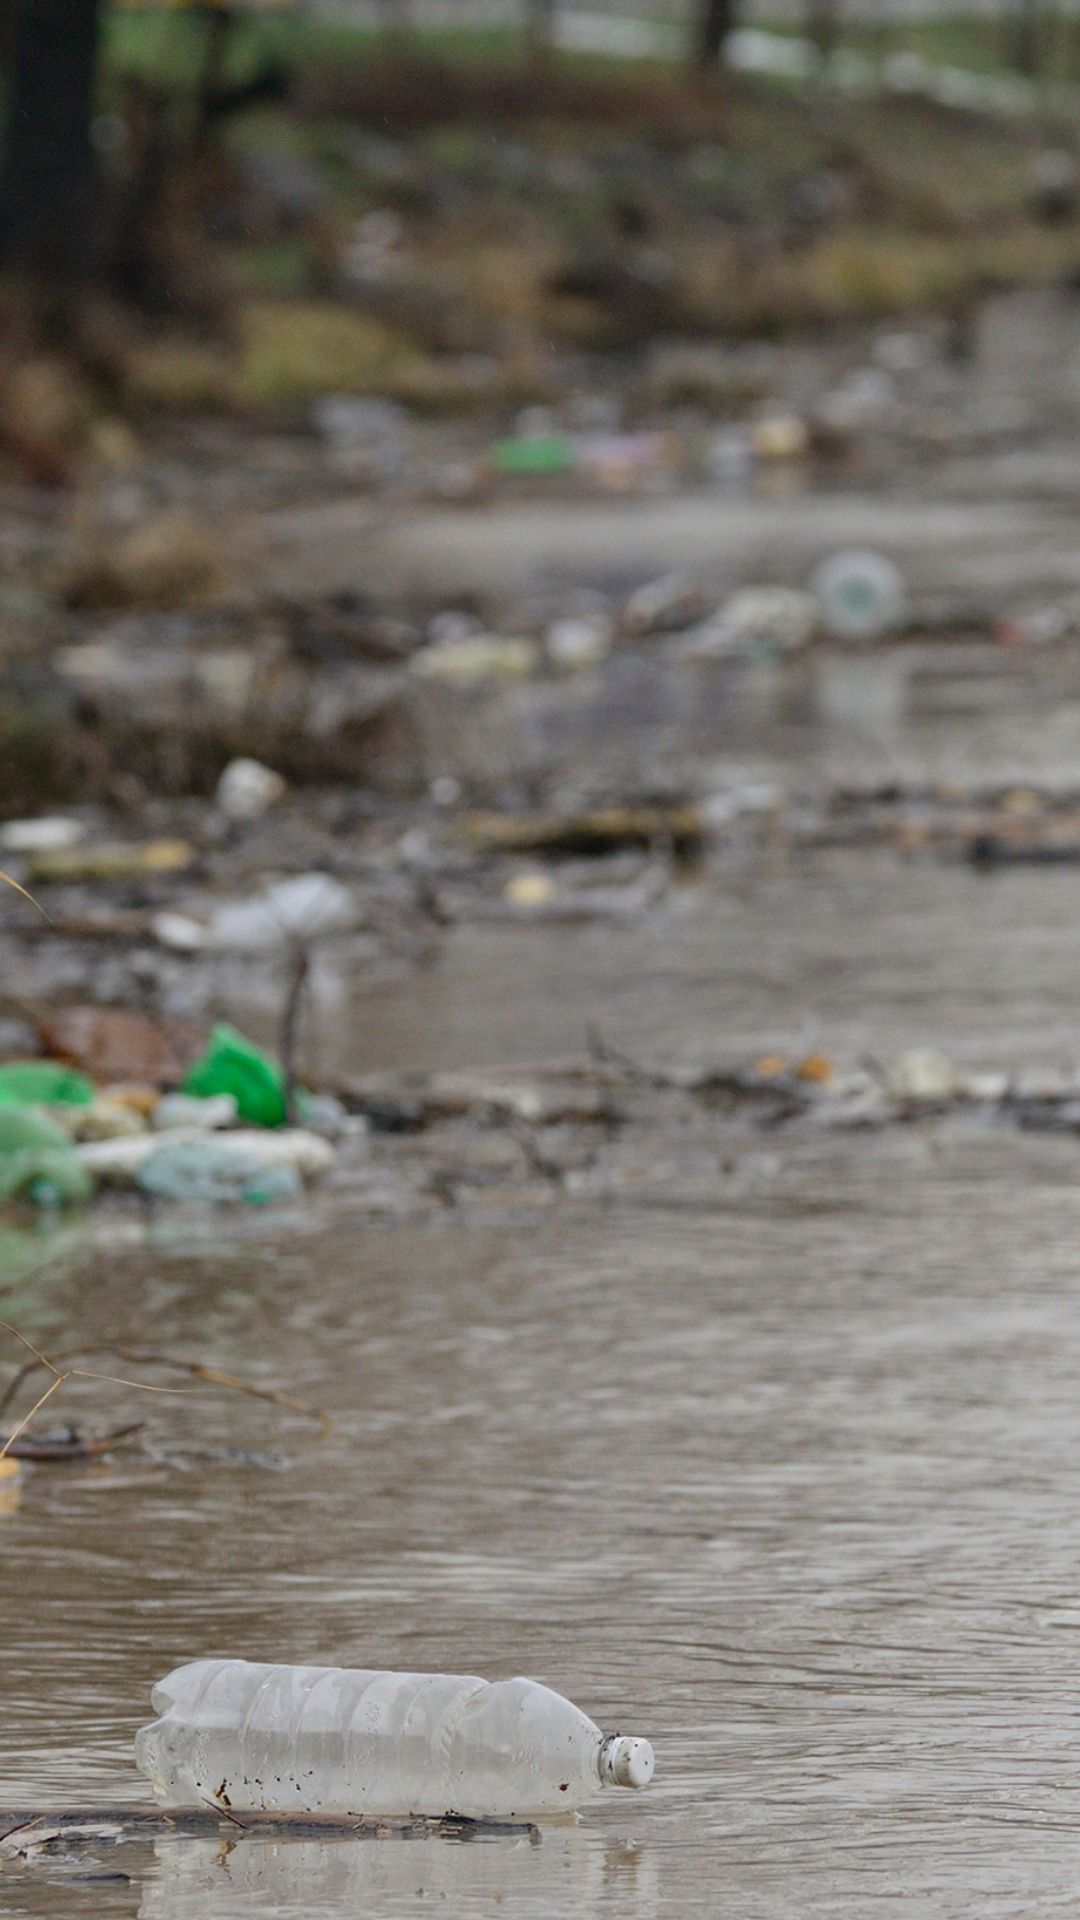 Dirty brown water flows with trash like plastic bottles in it.